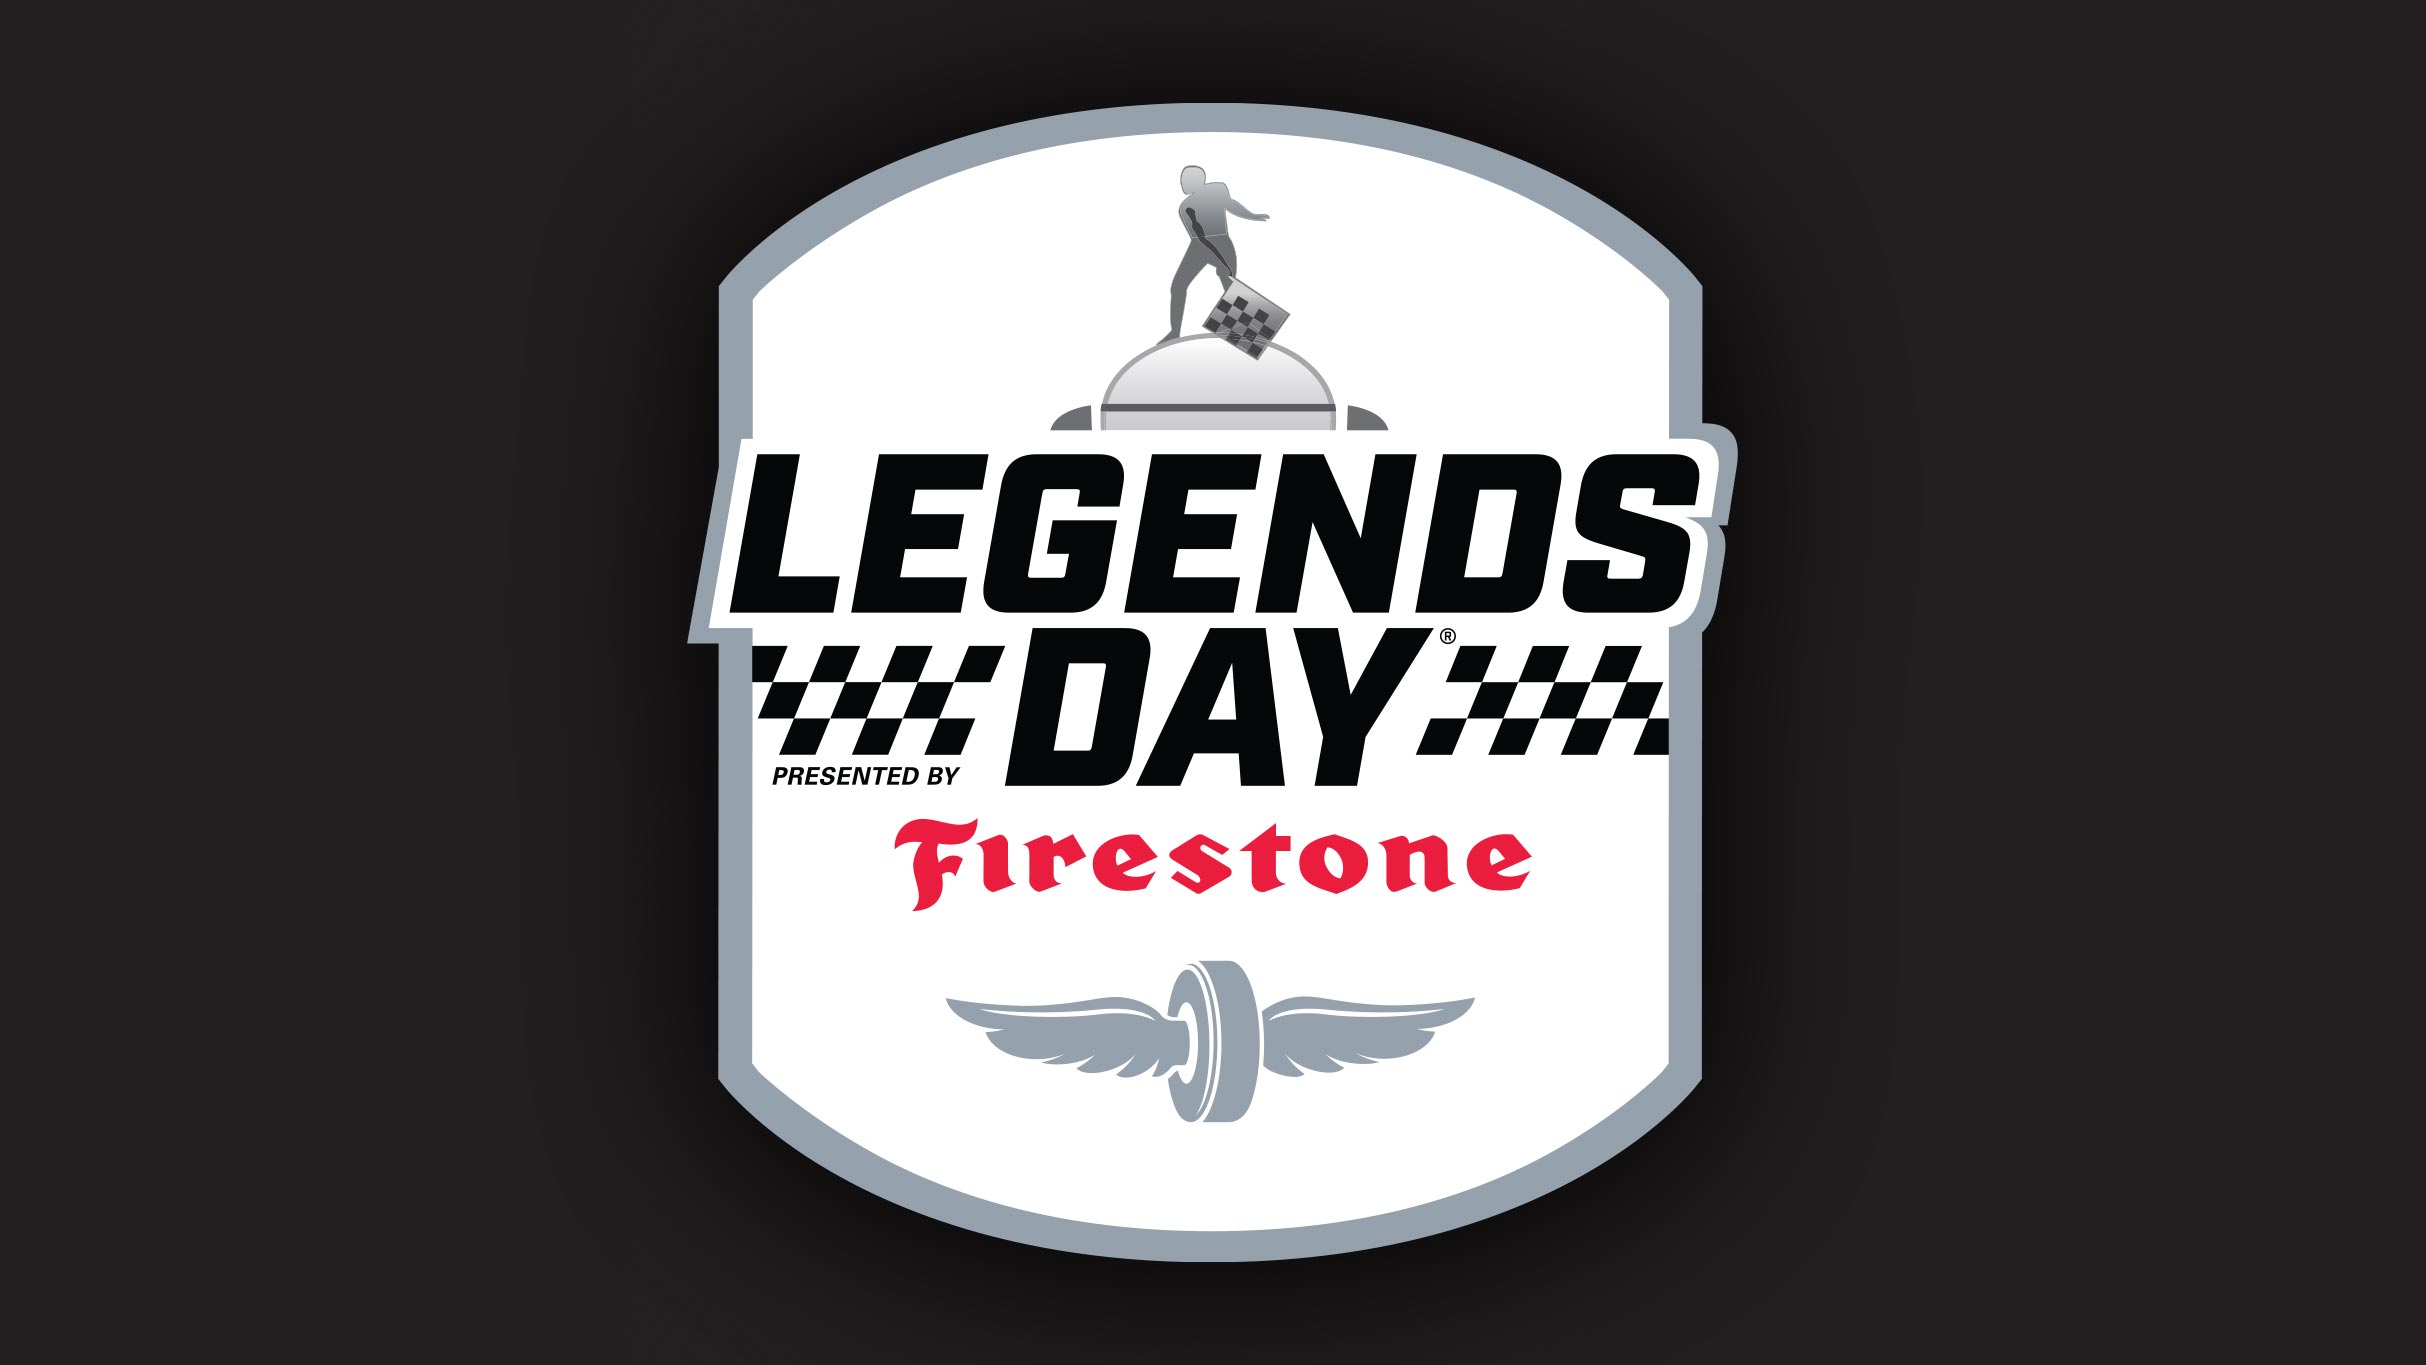 Firestone Legends Day Concert Featuring Brad Paisley in Indianapolis promo photo for Concert Week Rakuten presale offer code